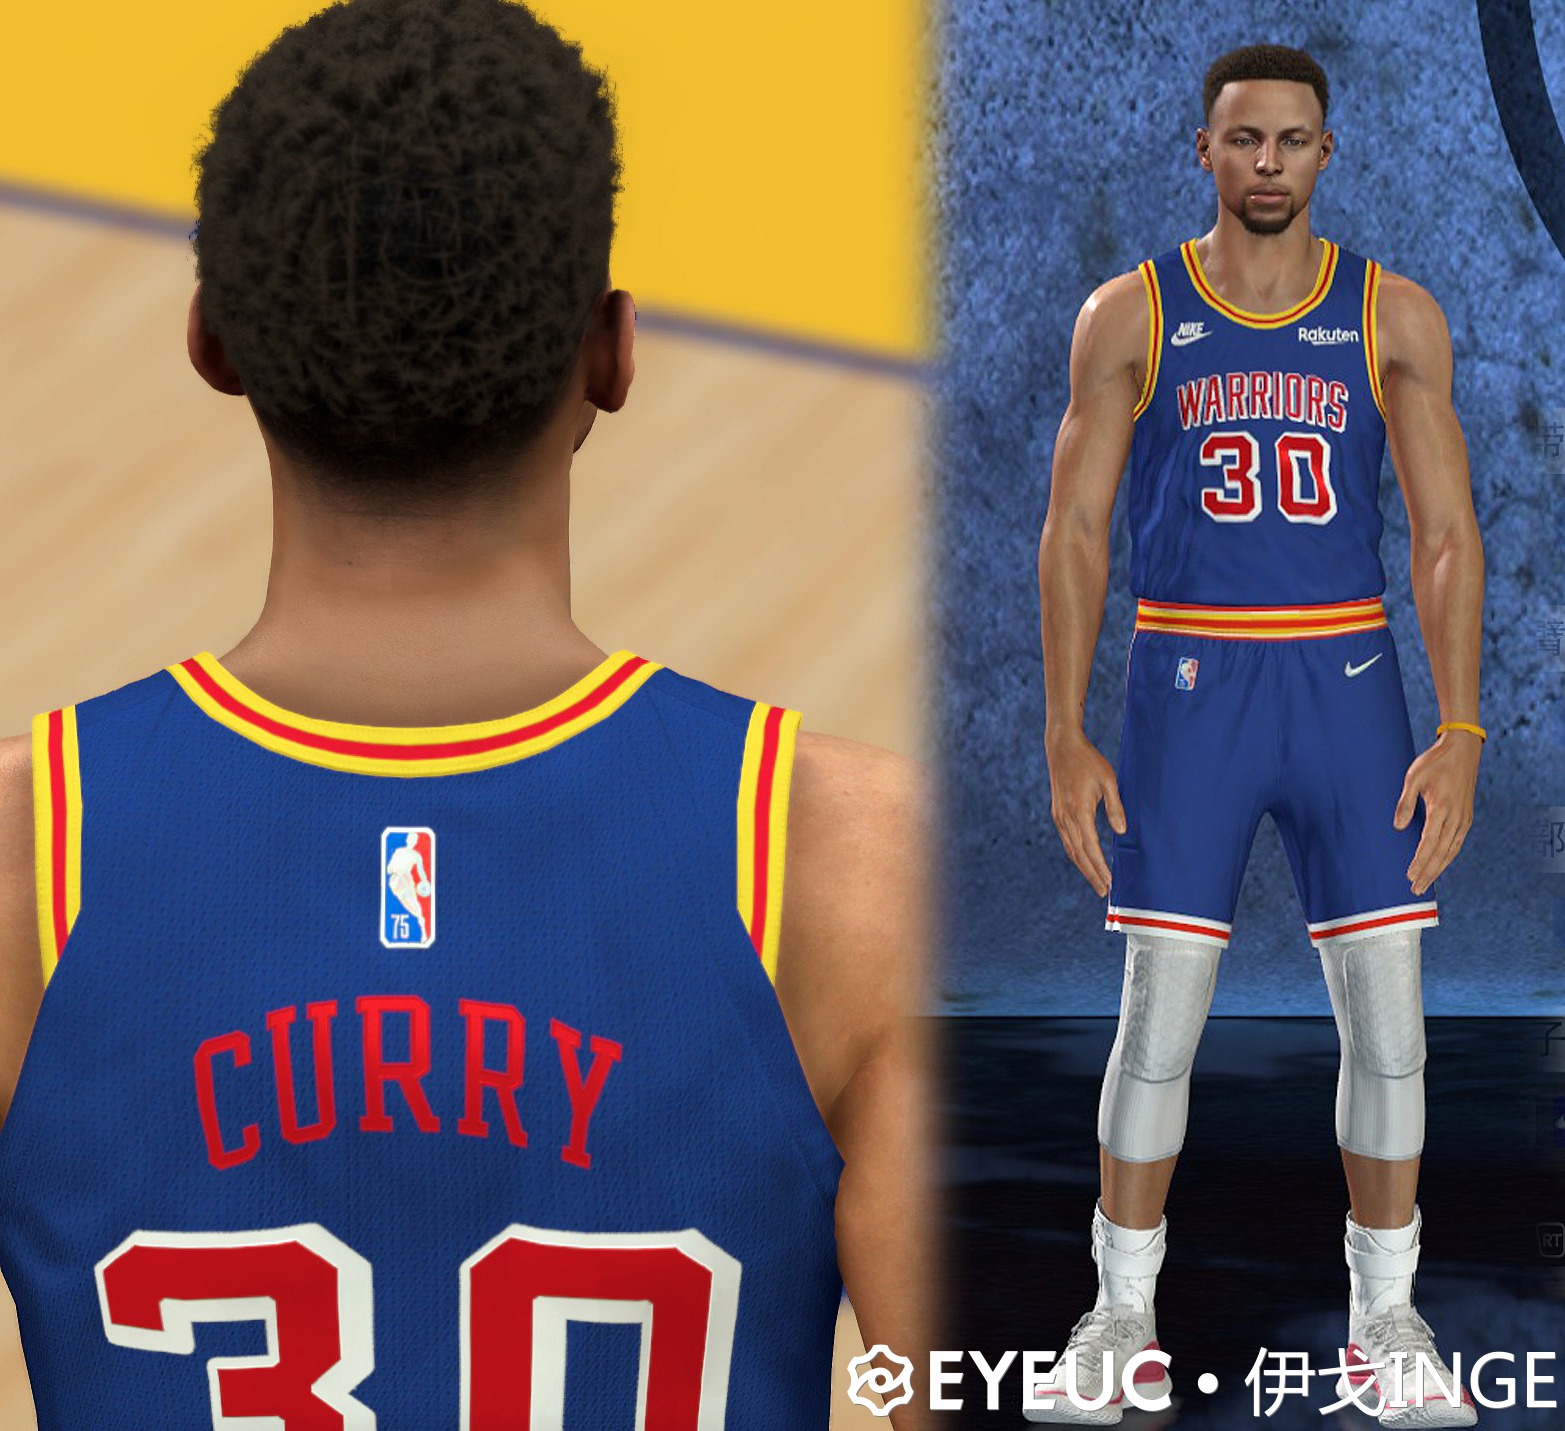 NBA 2K21 Golden State Warriors Classic 75th Anniversary Jersey 2021-22 by  AGP2K Gaming PH - Shuajota: NBA 2K24 Mods, Rosters & Cyberfaces